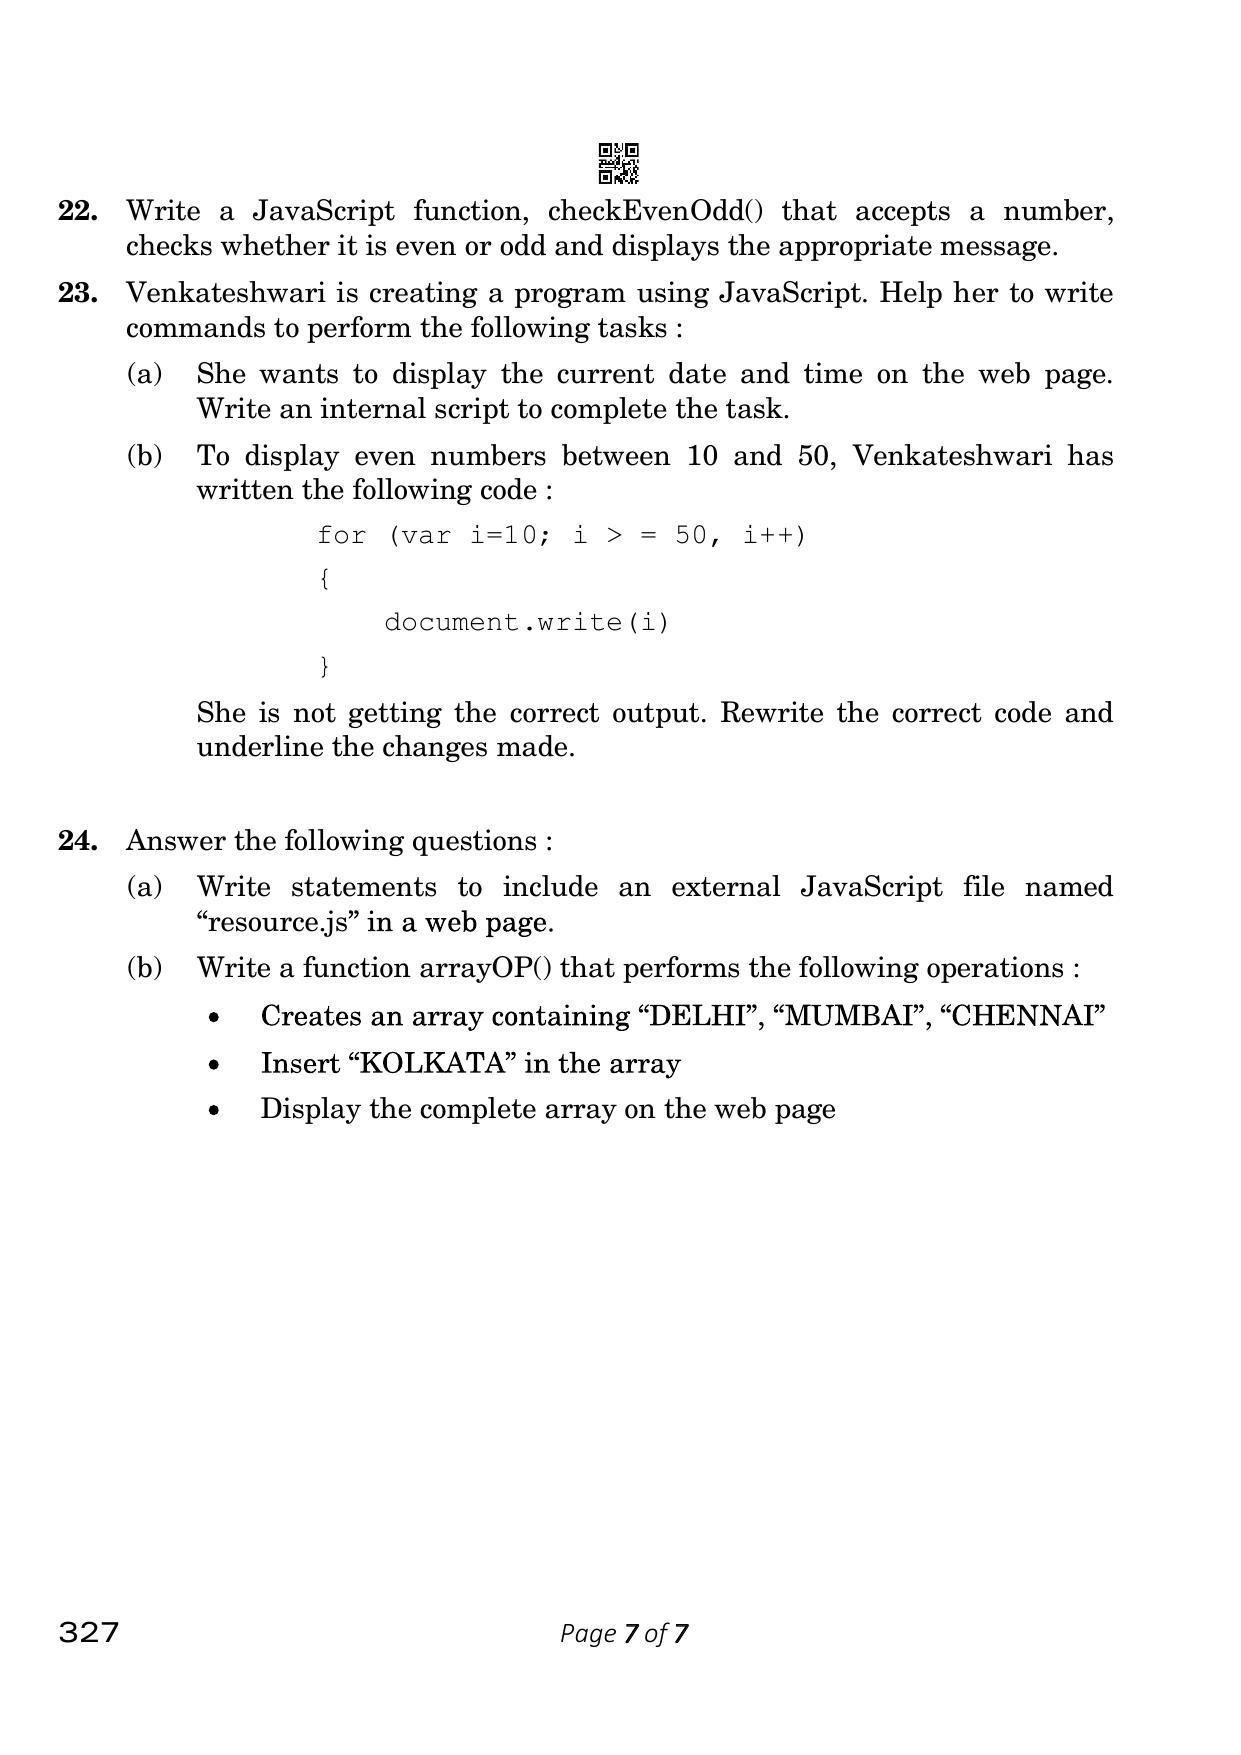 CBSE Class 12 327 Web Applications 2023 Question Paper - Page 7